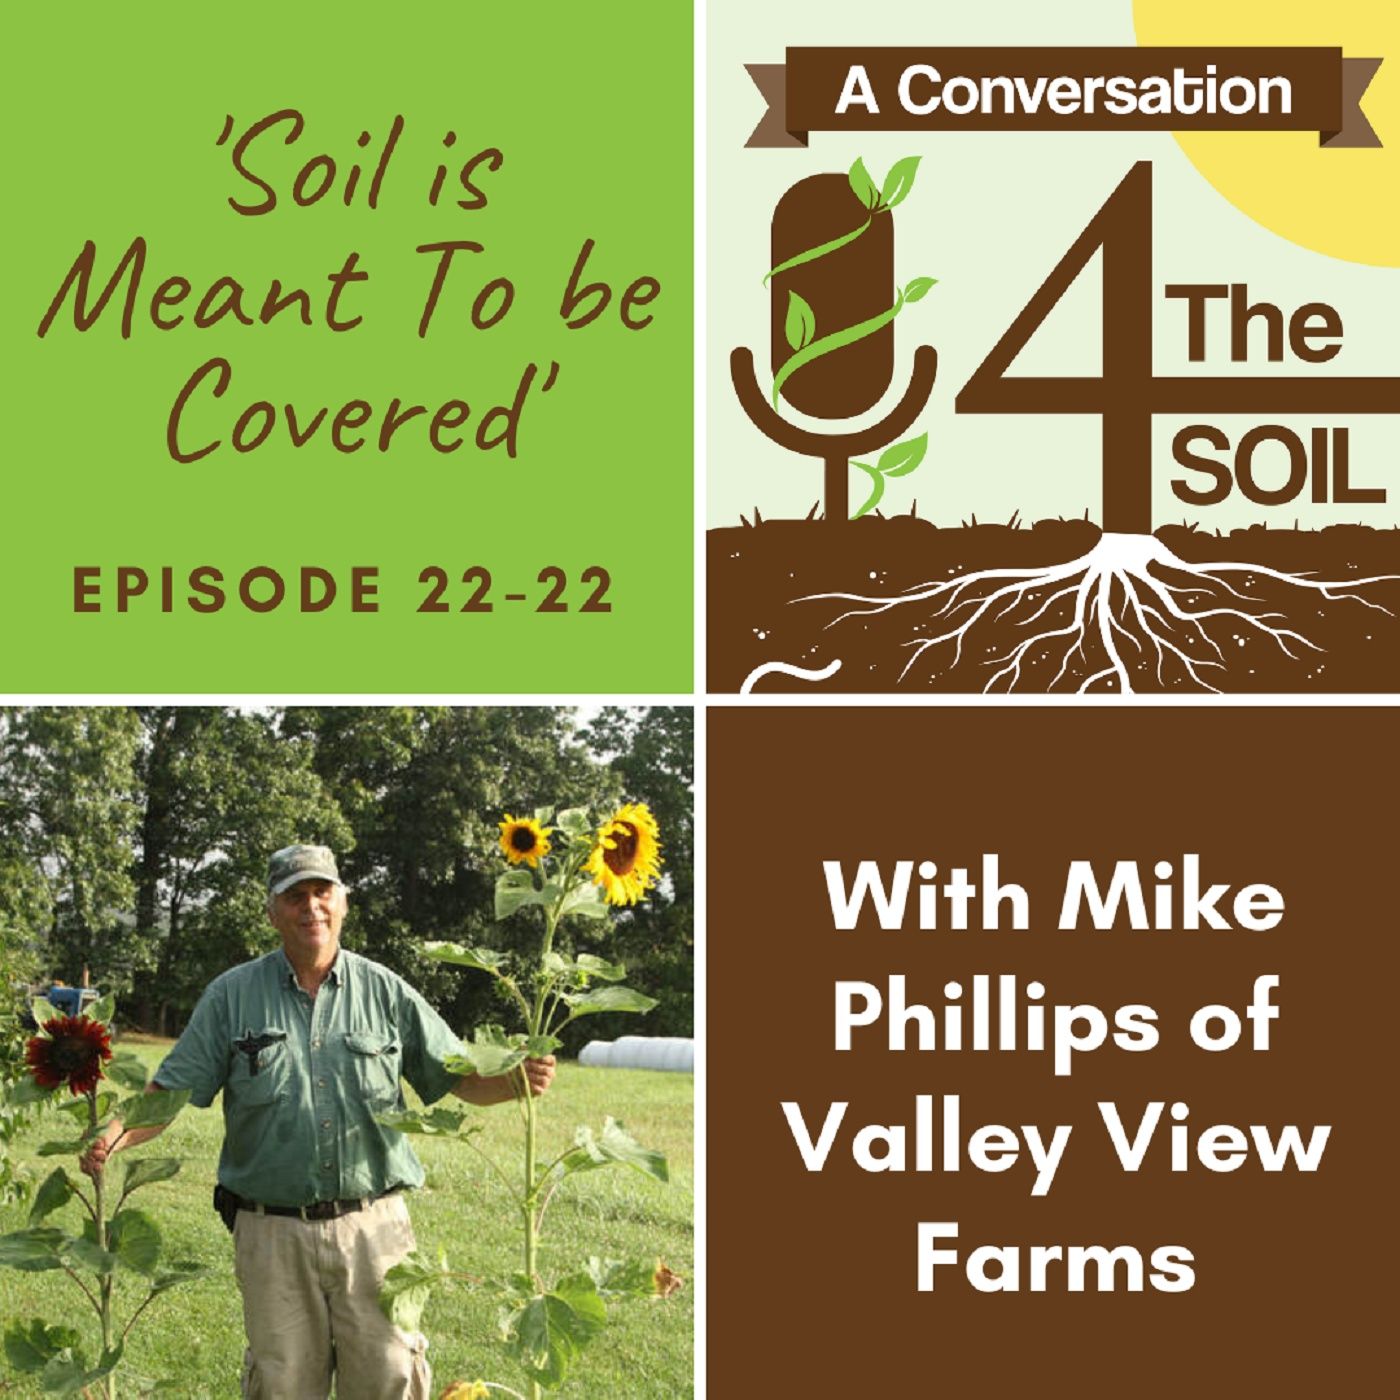 Episode 22 - 22: 'Soil is Meant to be Covered' with Mike Phillips of Valley View Farms